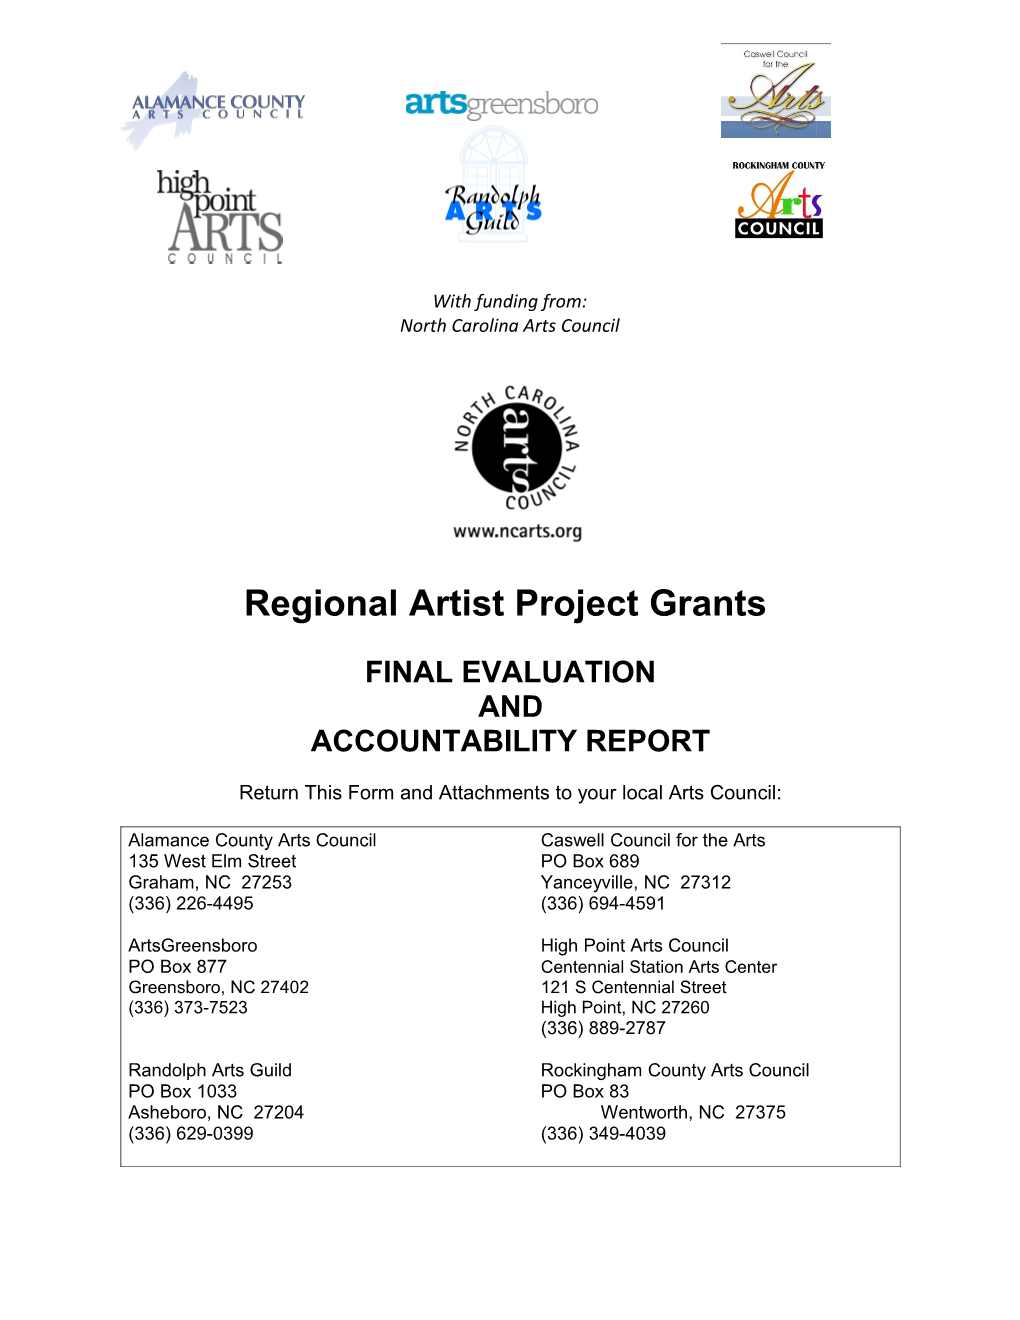 Final Evaluation and Accountability Report